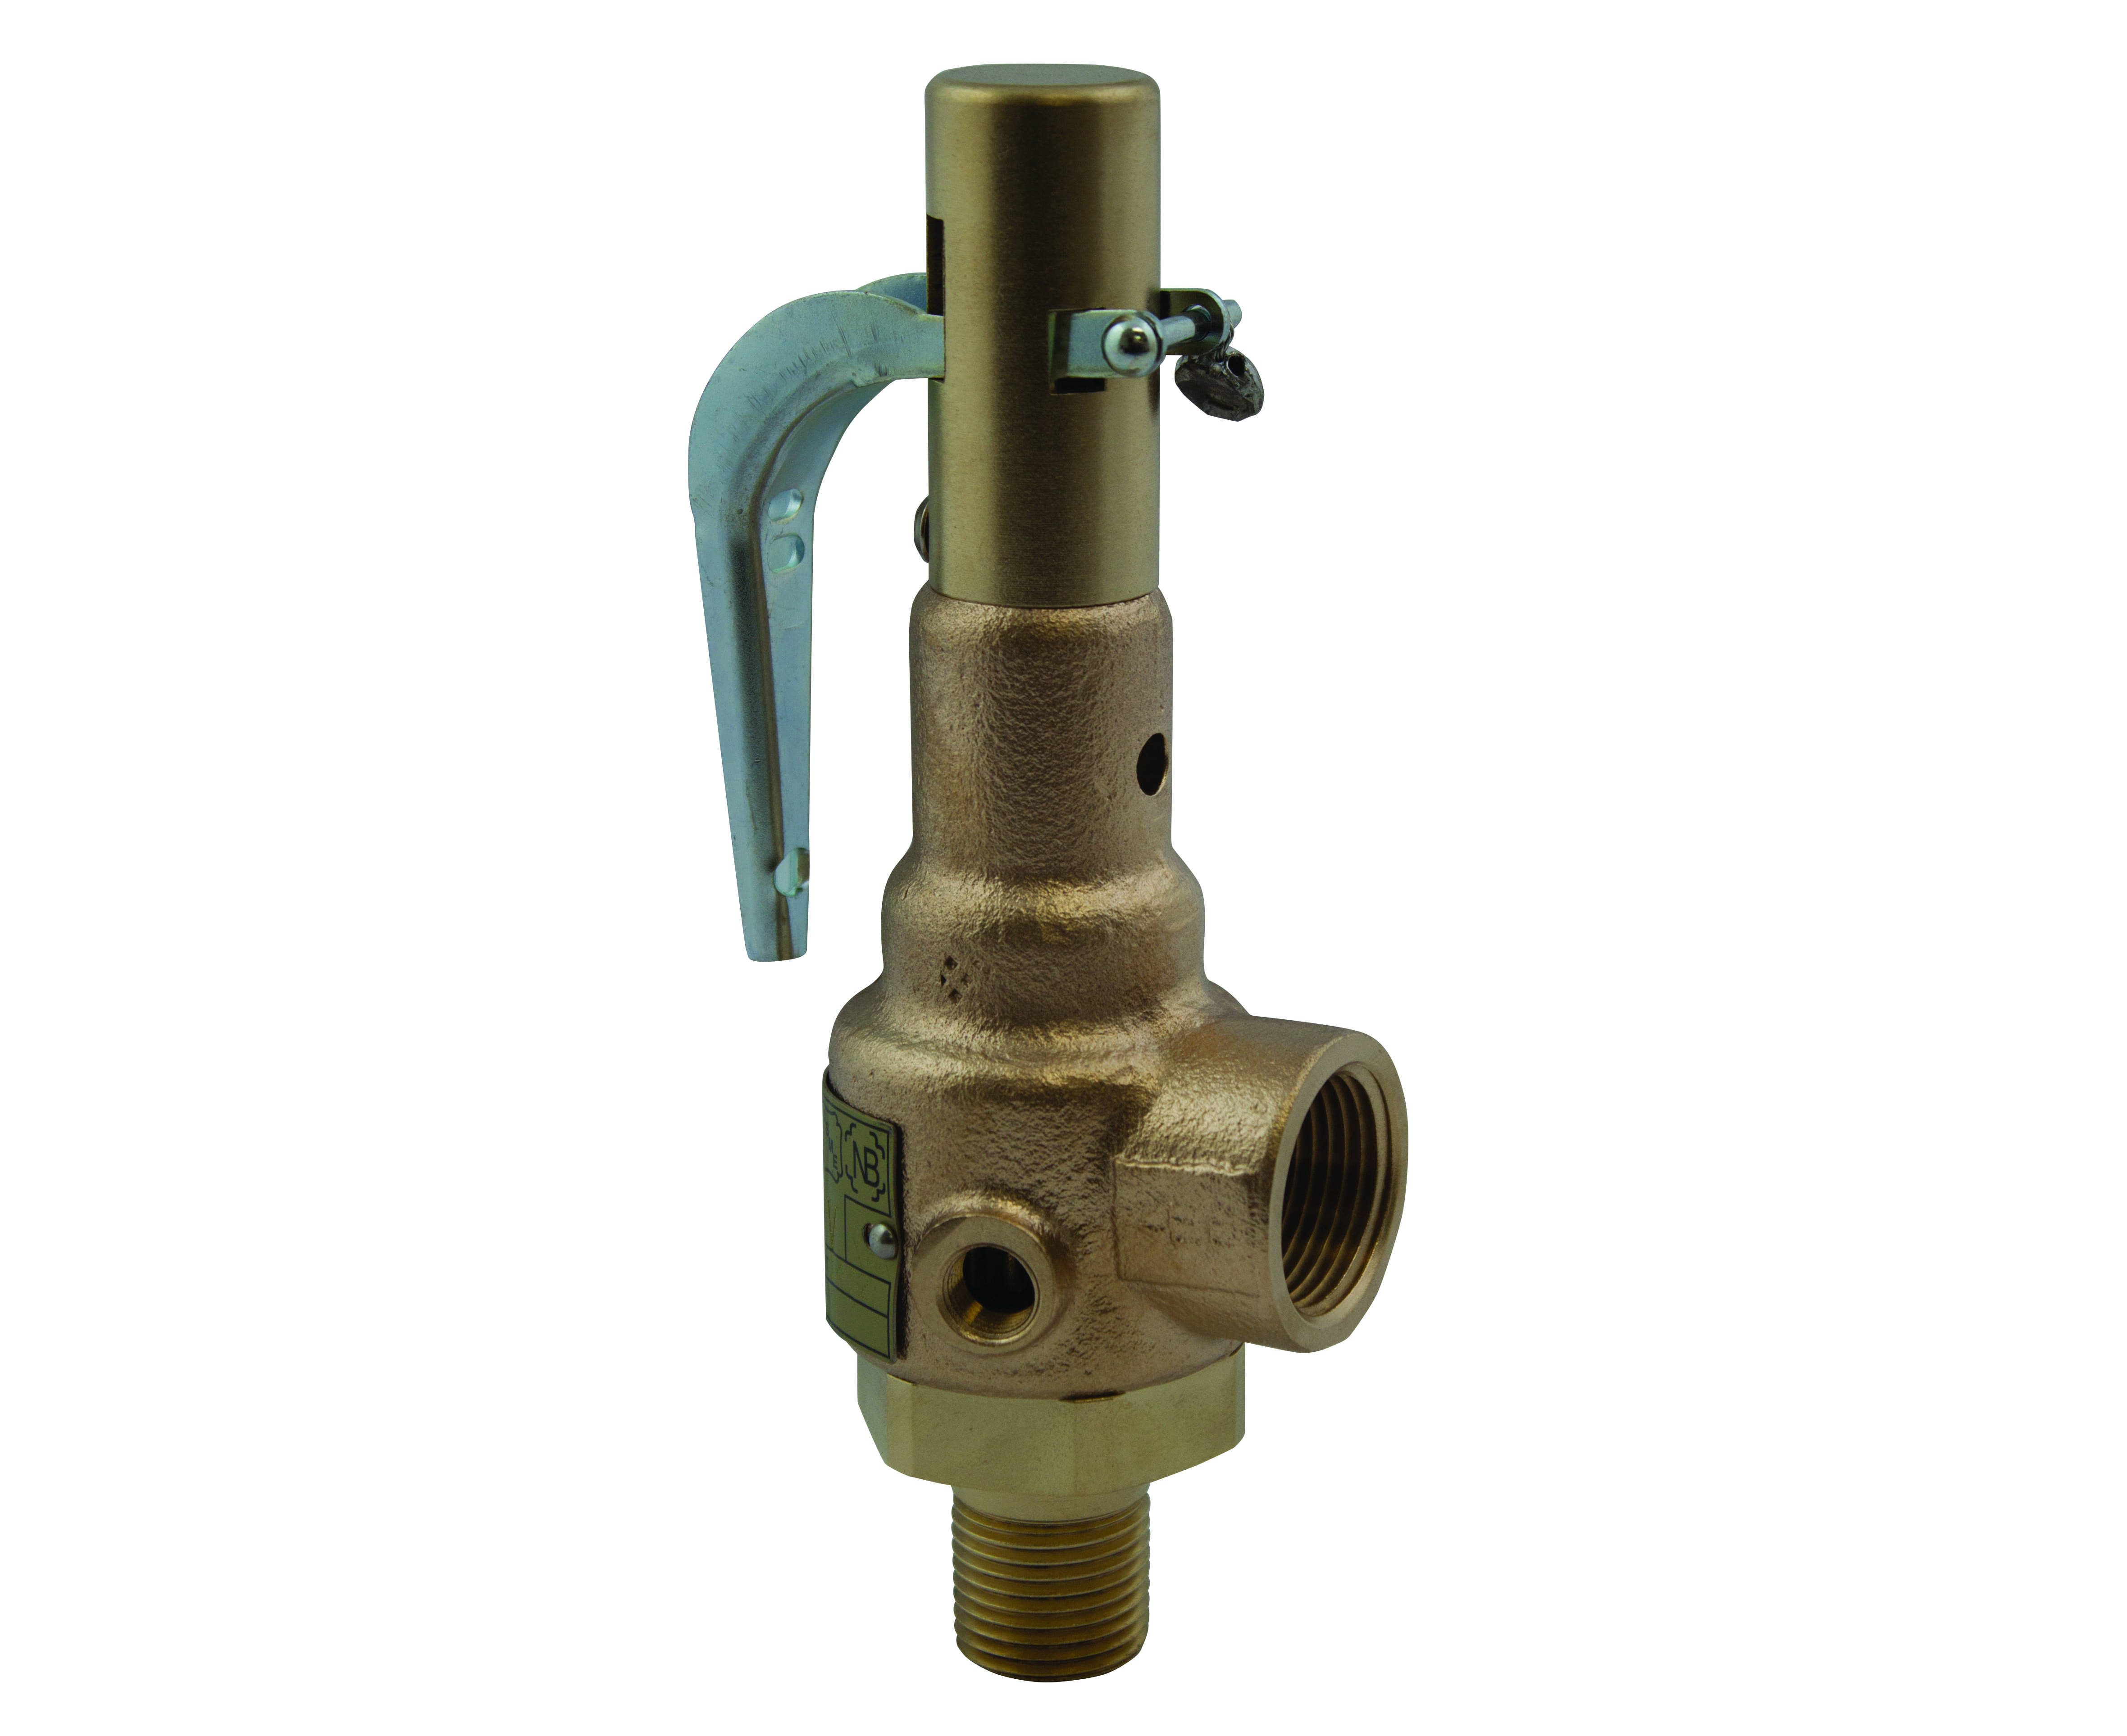 Preview image for Apollo ASME Sec VIII Air Bronze Safety Relief Valves with Brass Trim, Teflon Seat, Anti-Vibration Trim & Performance Test Reports Included, 1/2" x 3/4" (MNPT x FNPT)